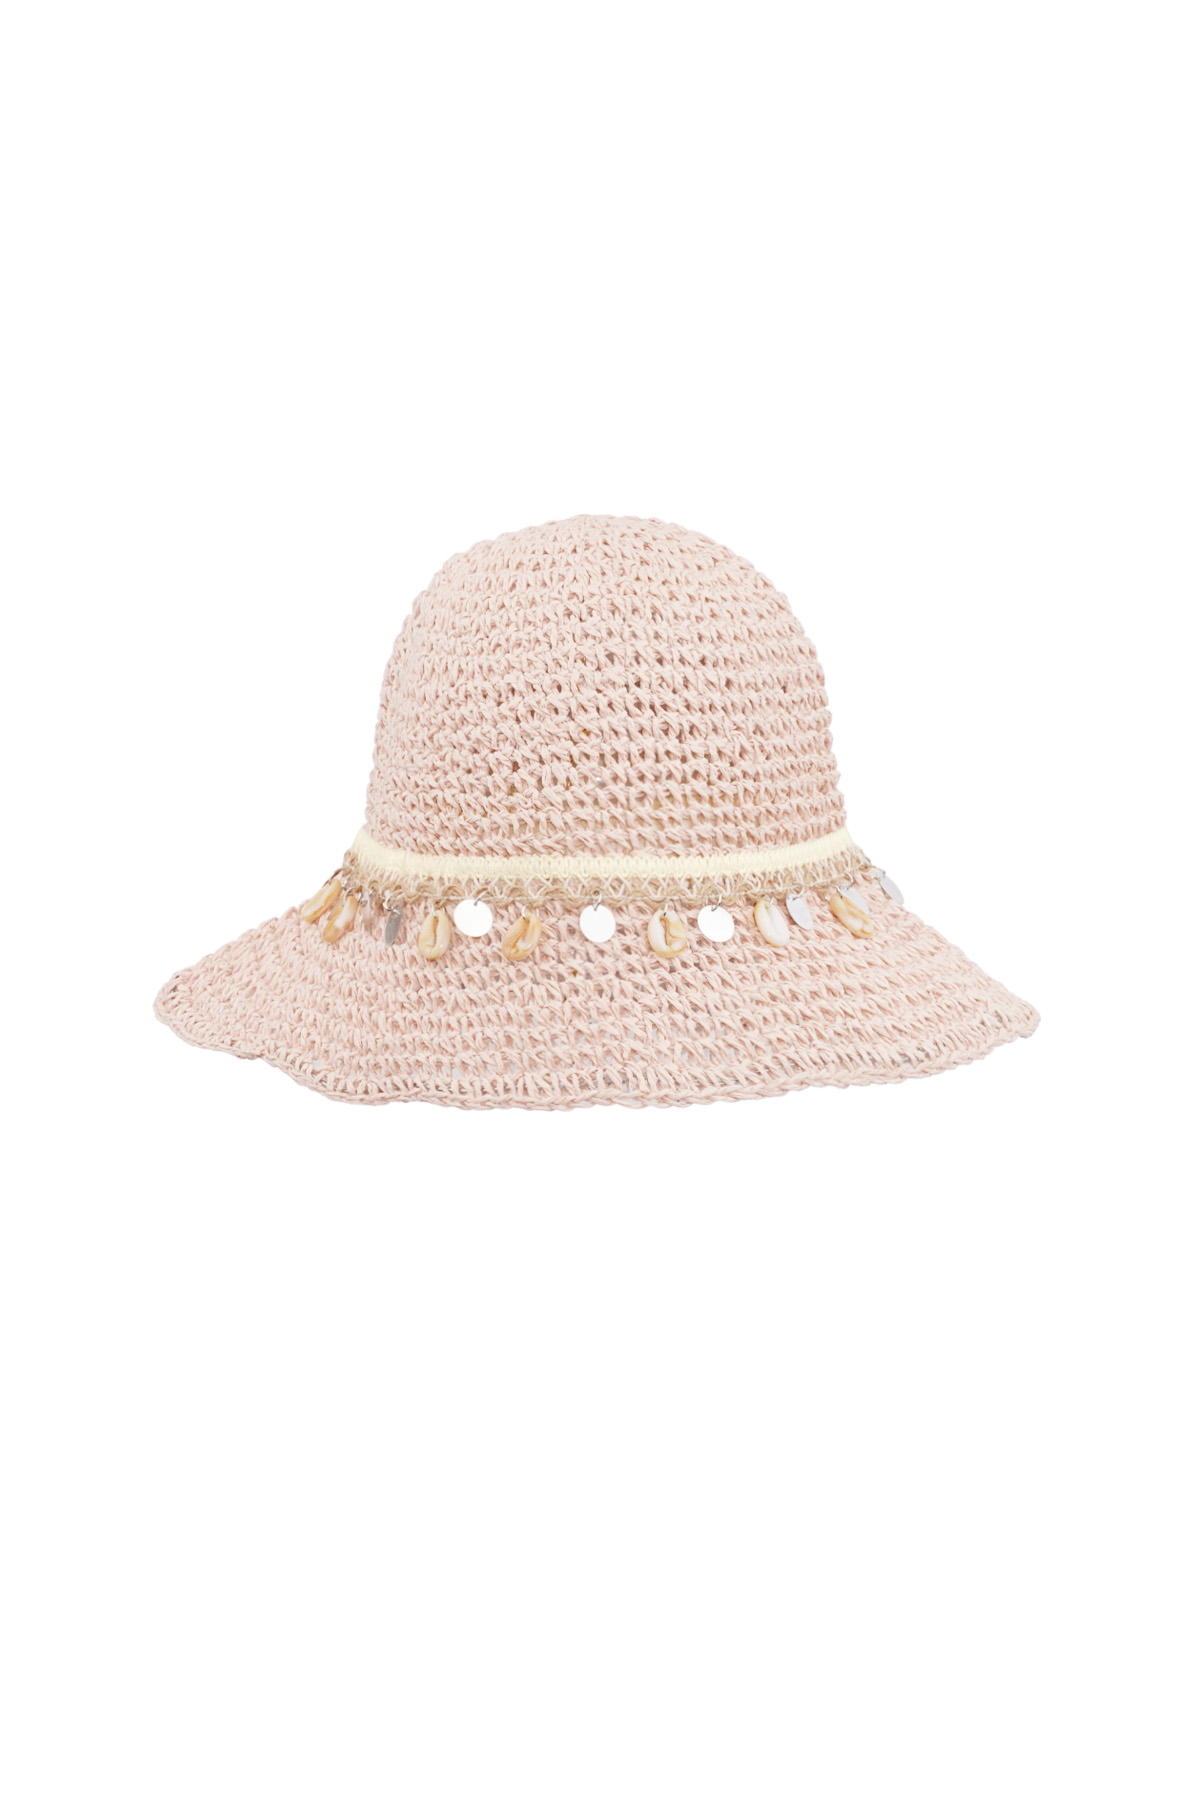 Beach hat with shells - pink